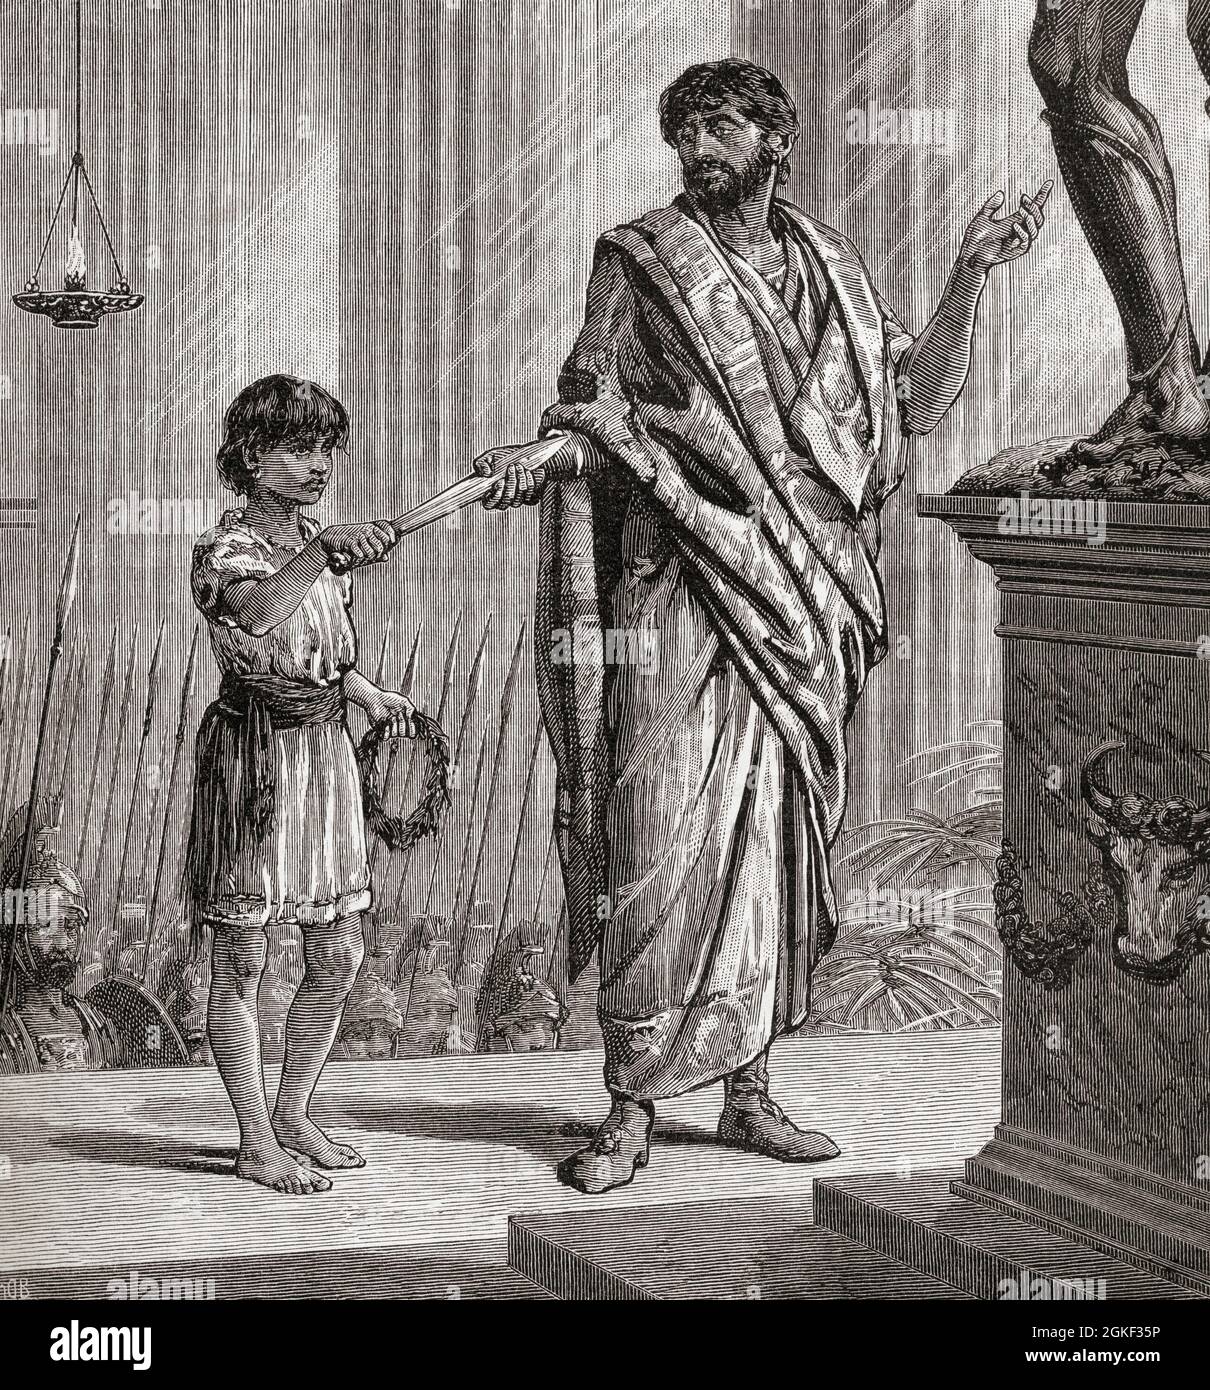 The child Hannibal Barca, 247 - circa 183 BC swears to his father, Hamilcar Barca, circa 275 - 228 BC, that he will never be a friend of Rome.  From Cassell's Illustrated Universal History, published 1883. Stock Photo